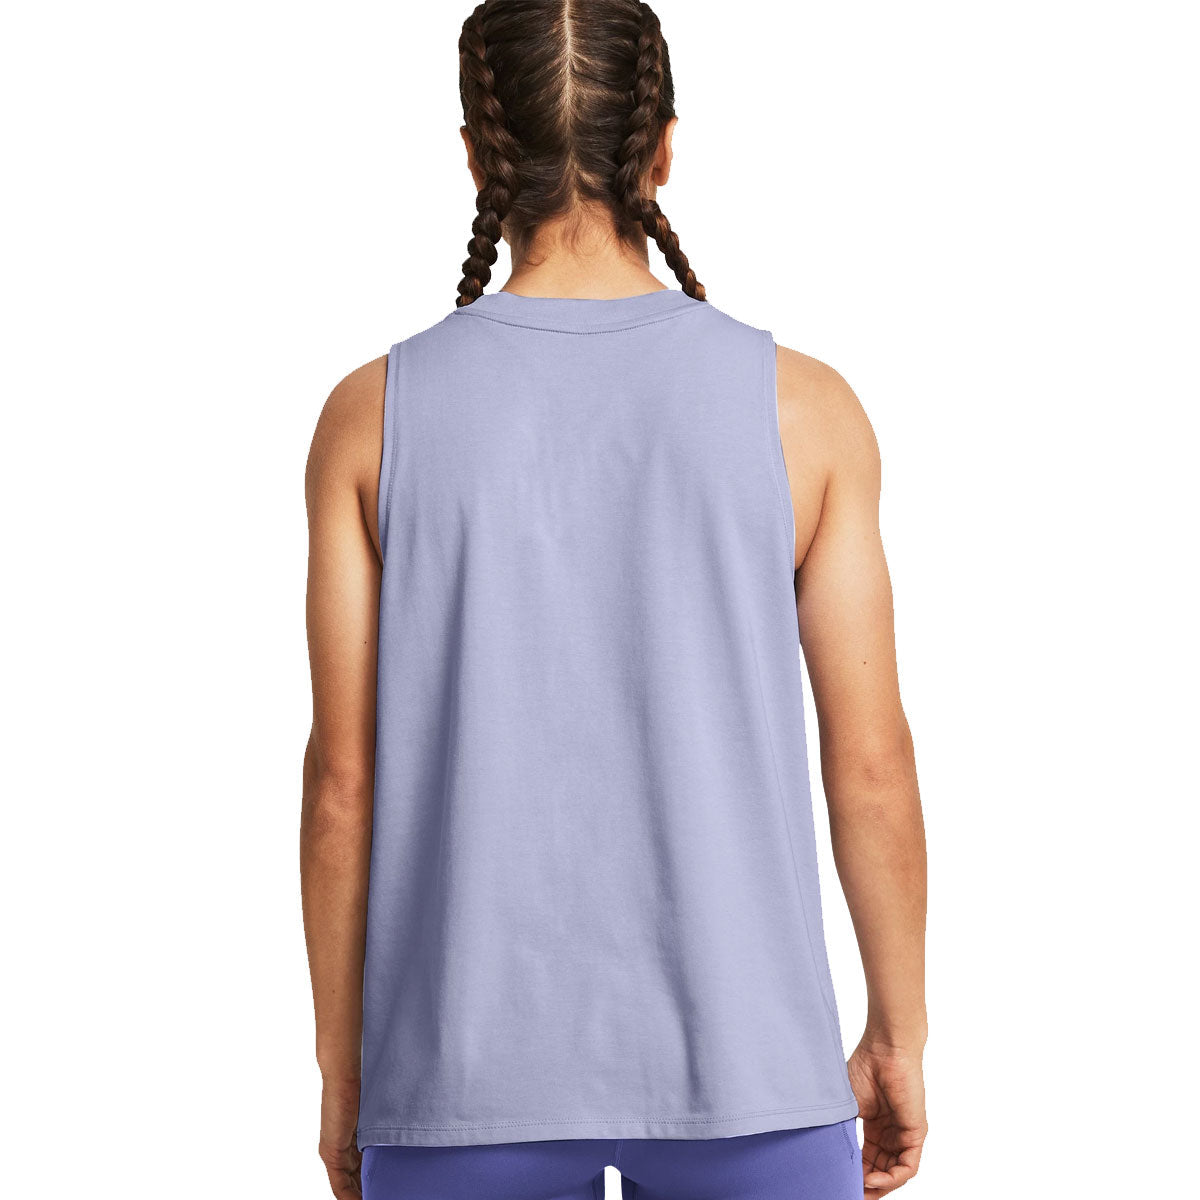 Under Armour Off Campus Muscle Tank Top - Womens - Celeste/White